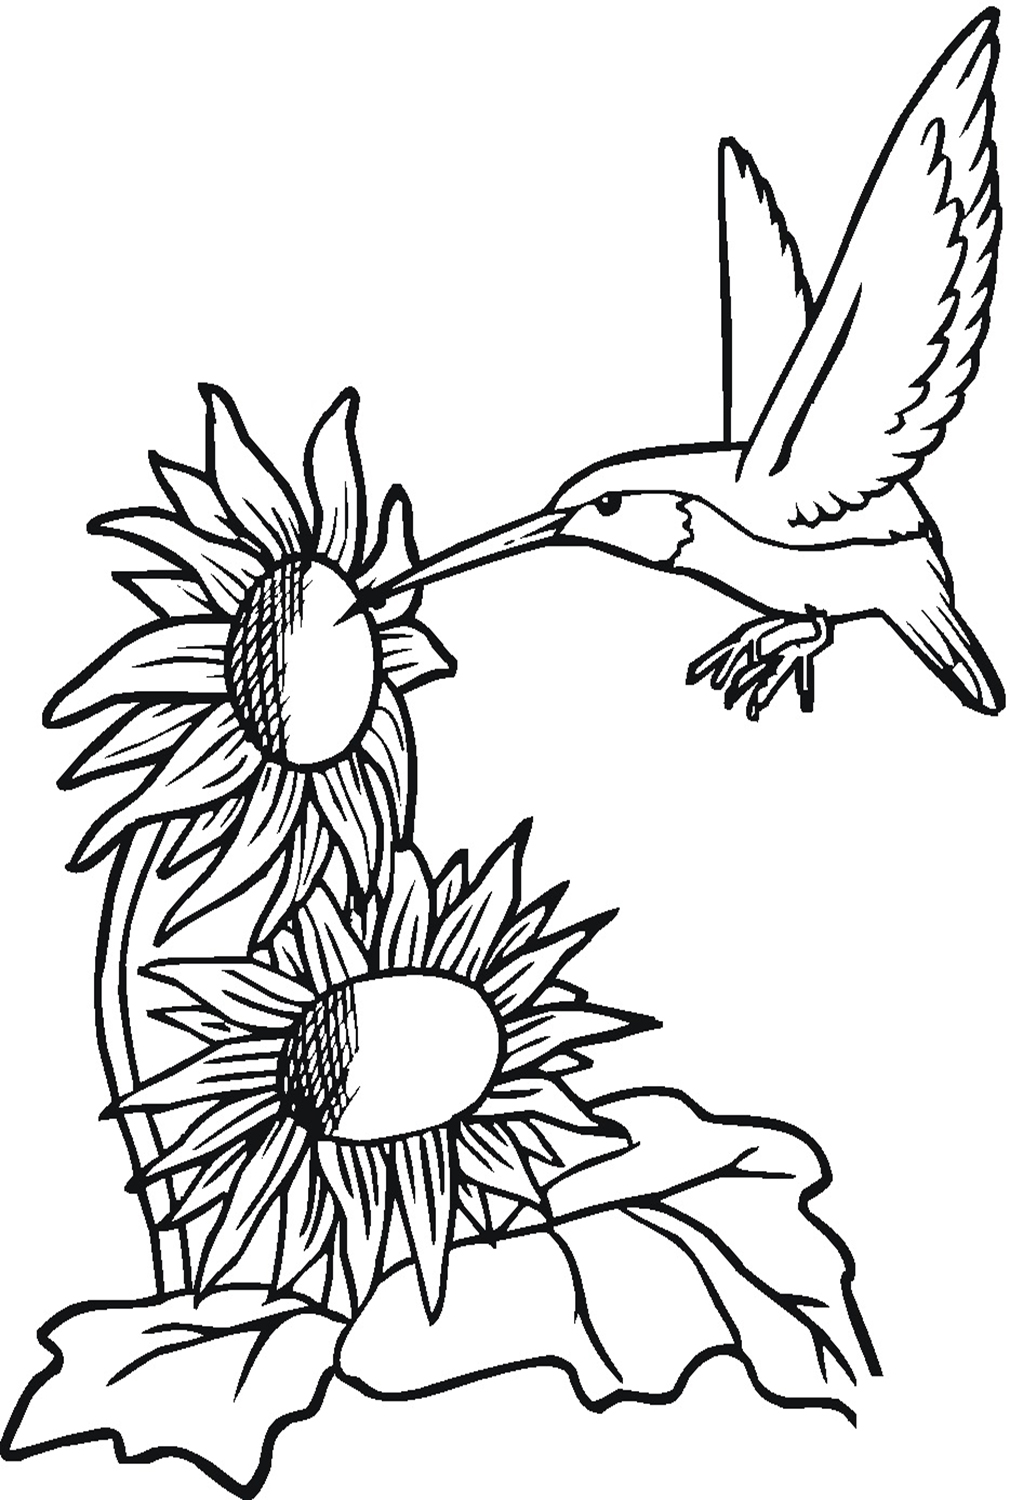 Hummingbird With Sunflowers Coloring Page